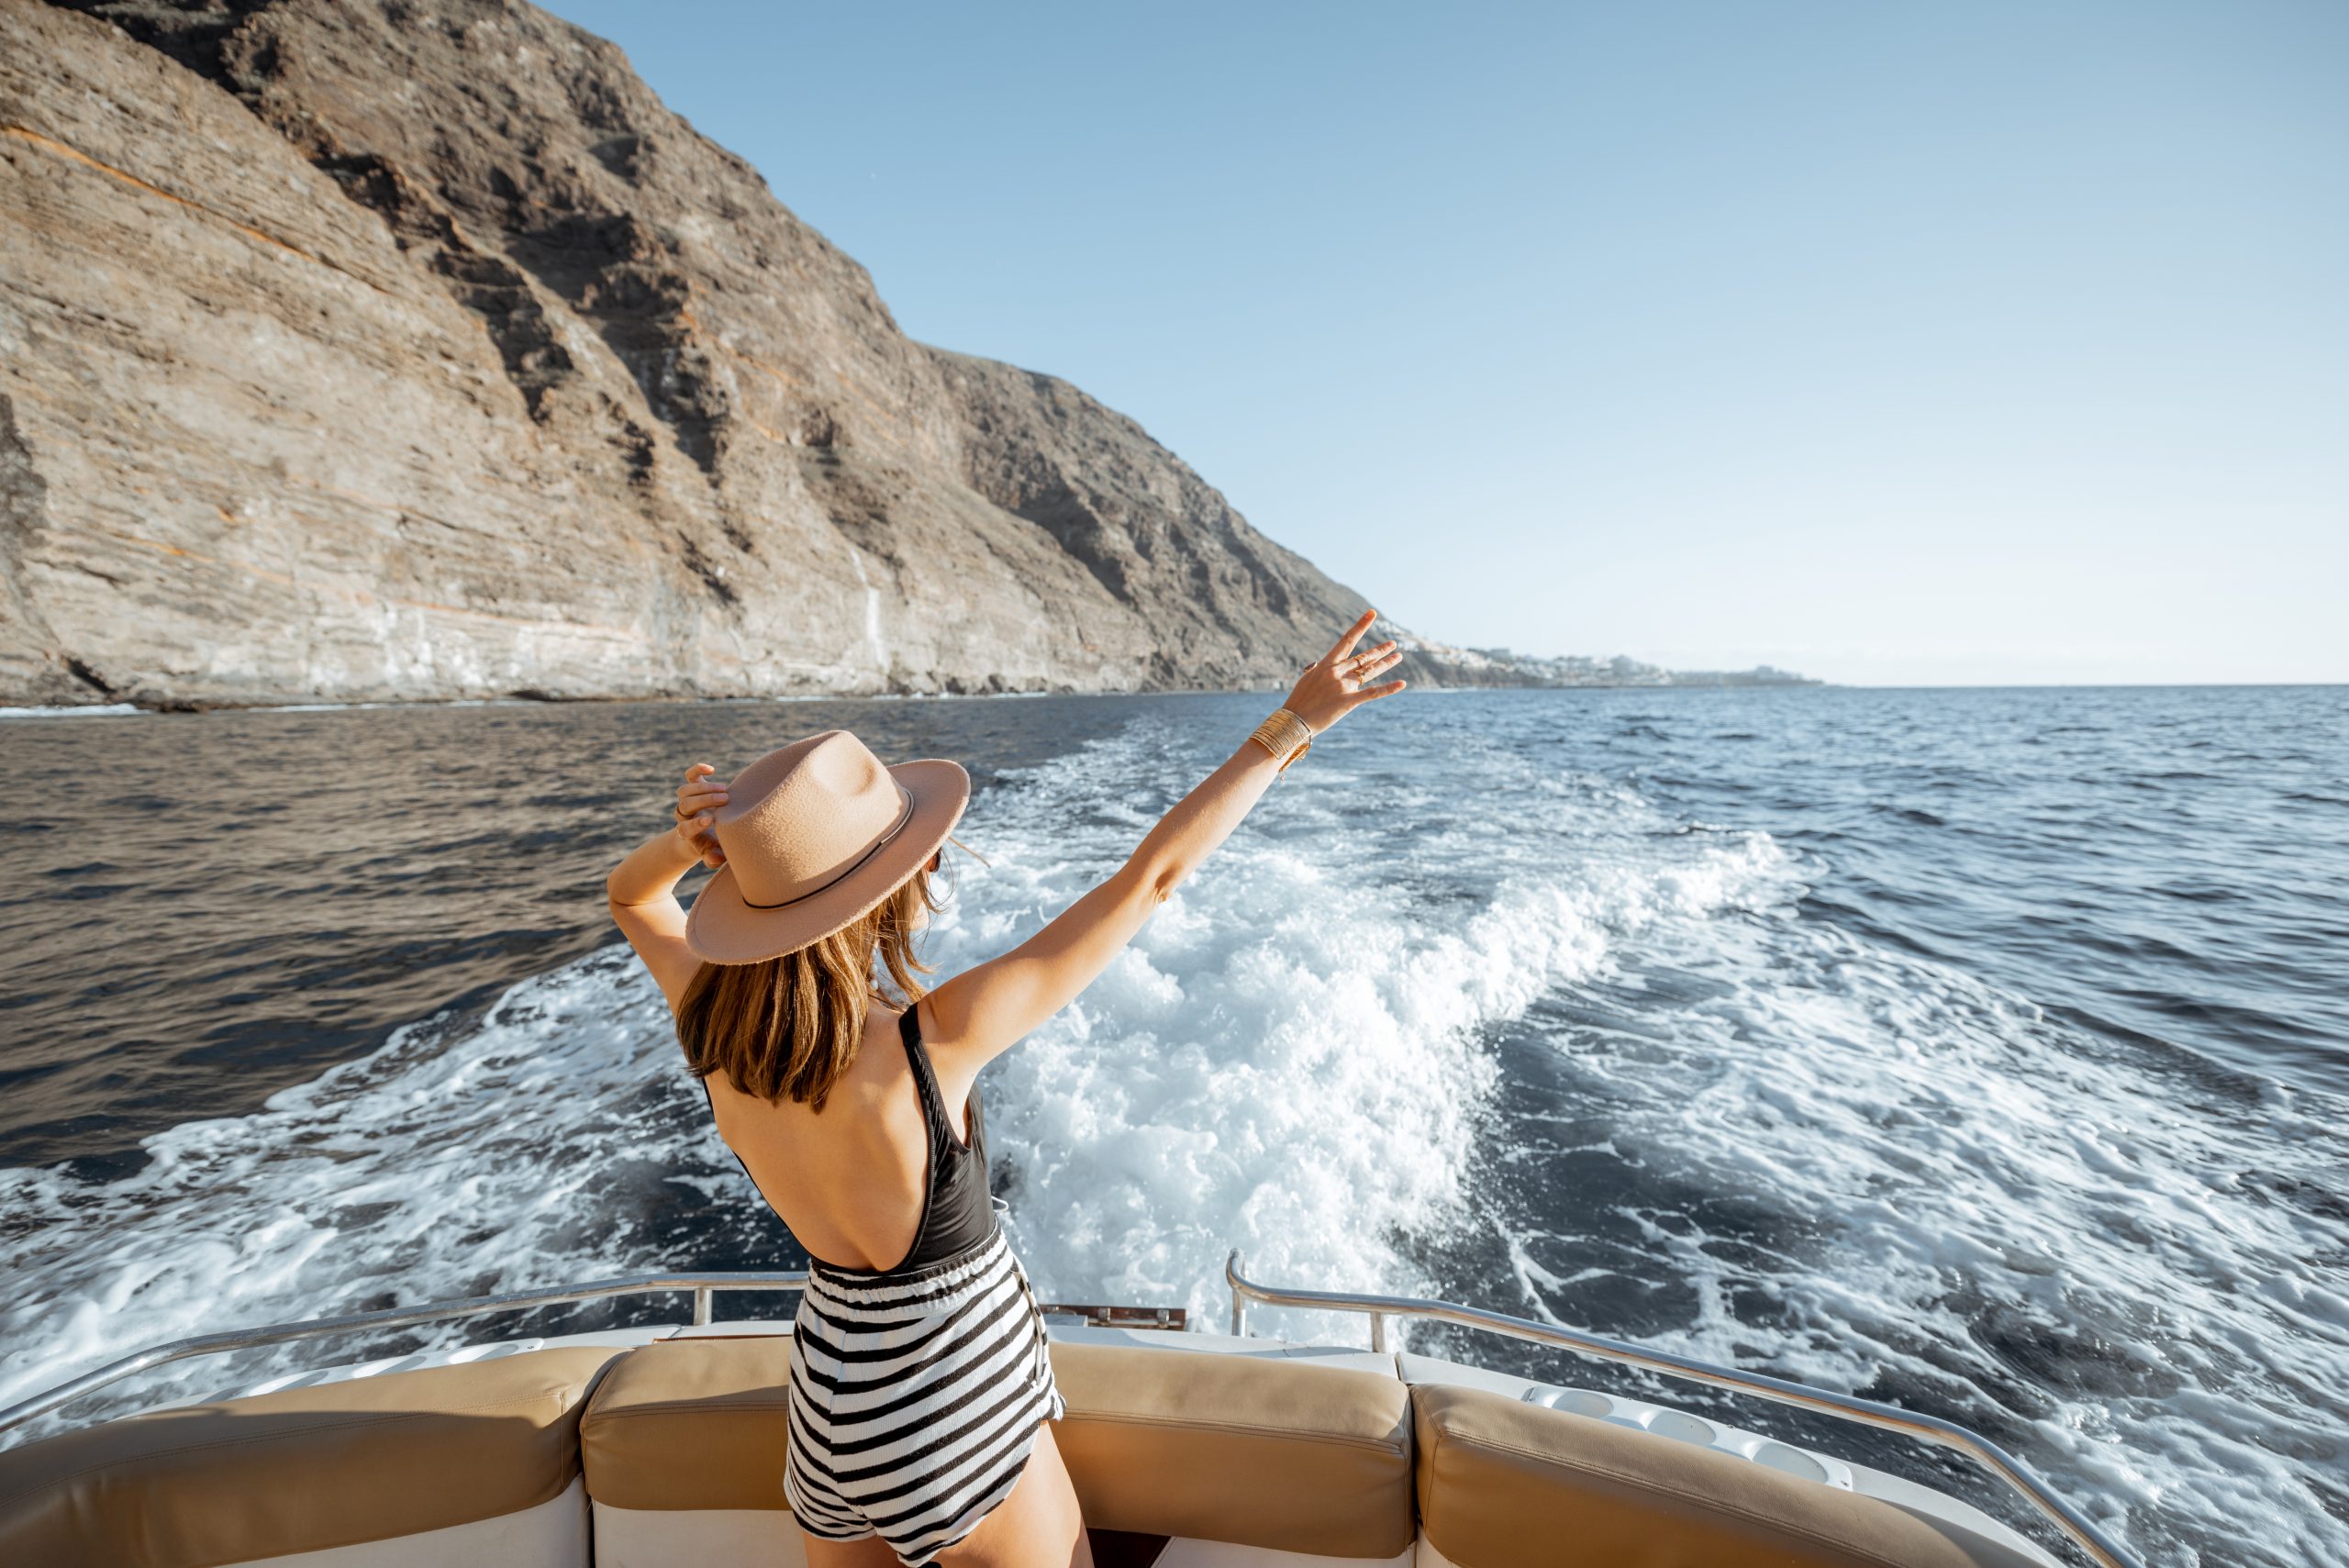 Relaxed woman sailing on the yacht near the rocky coast